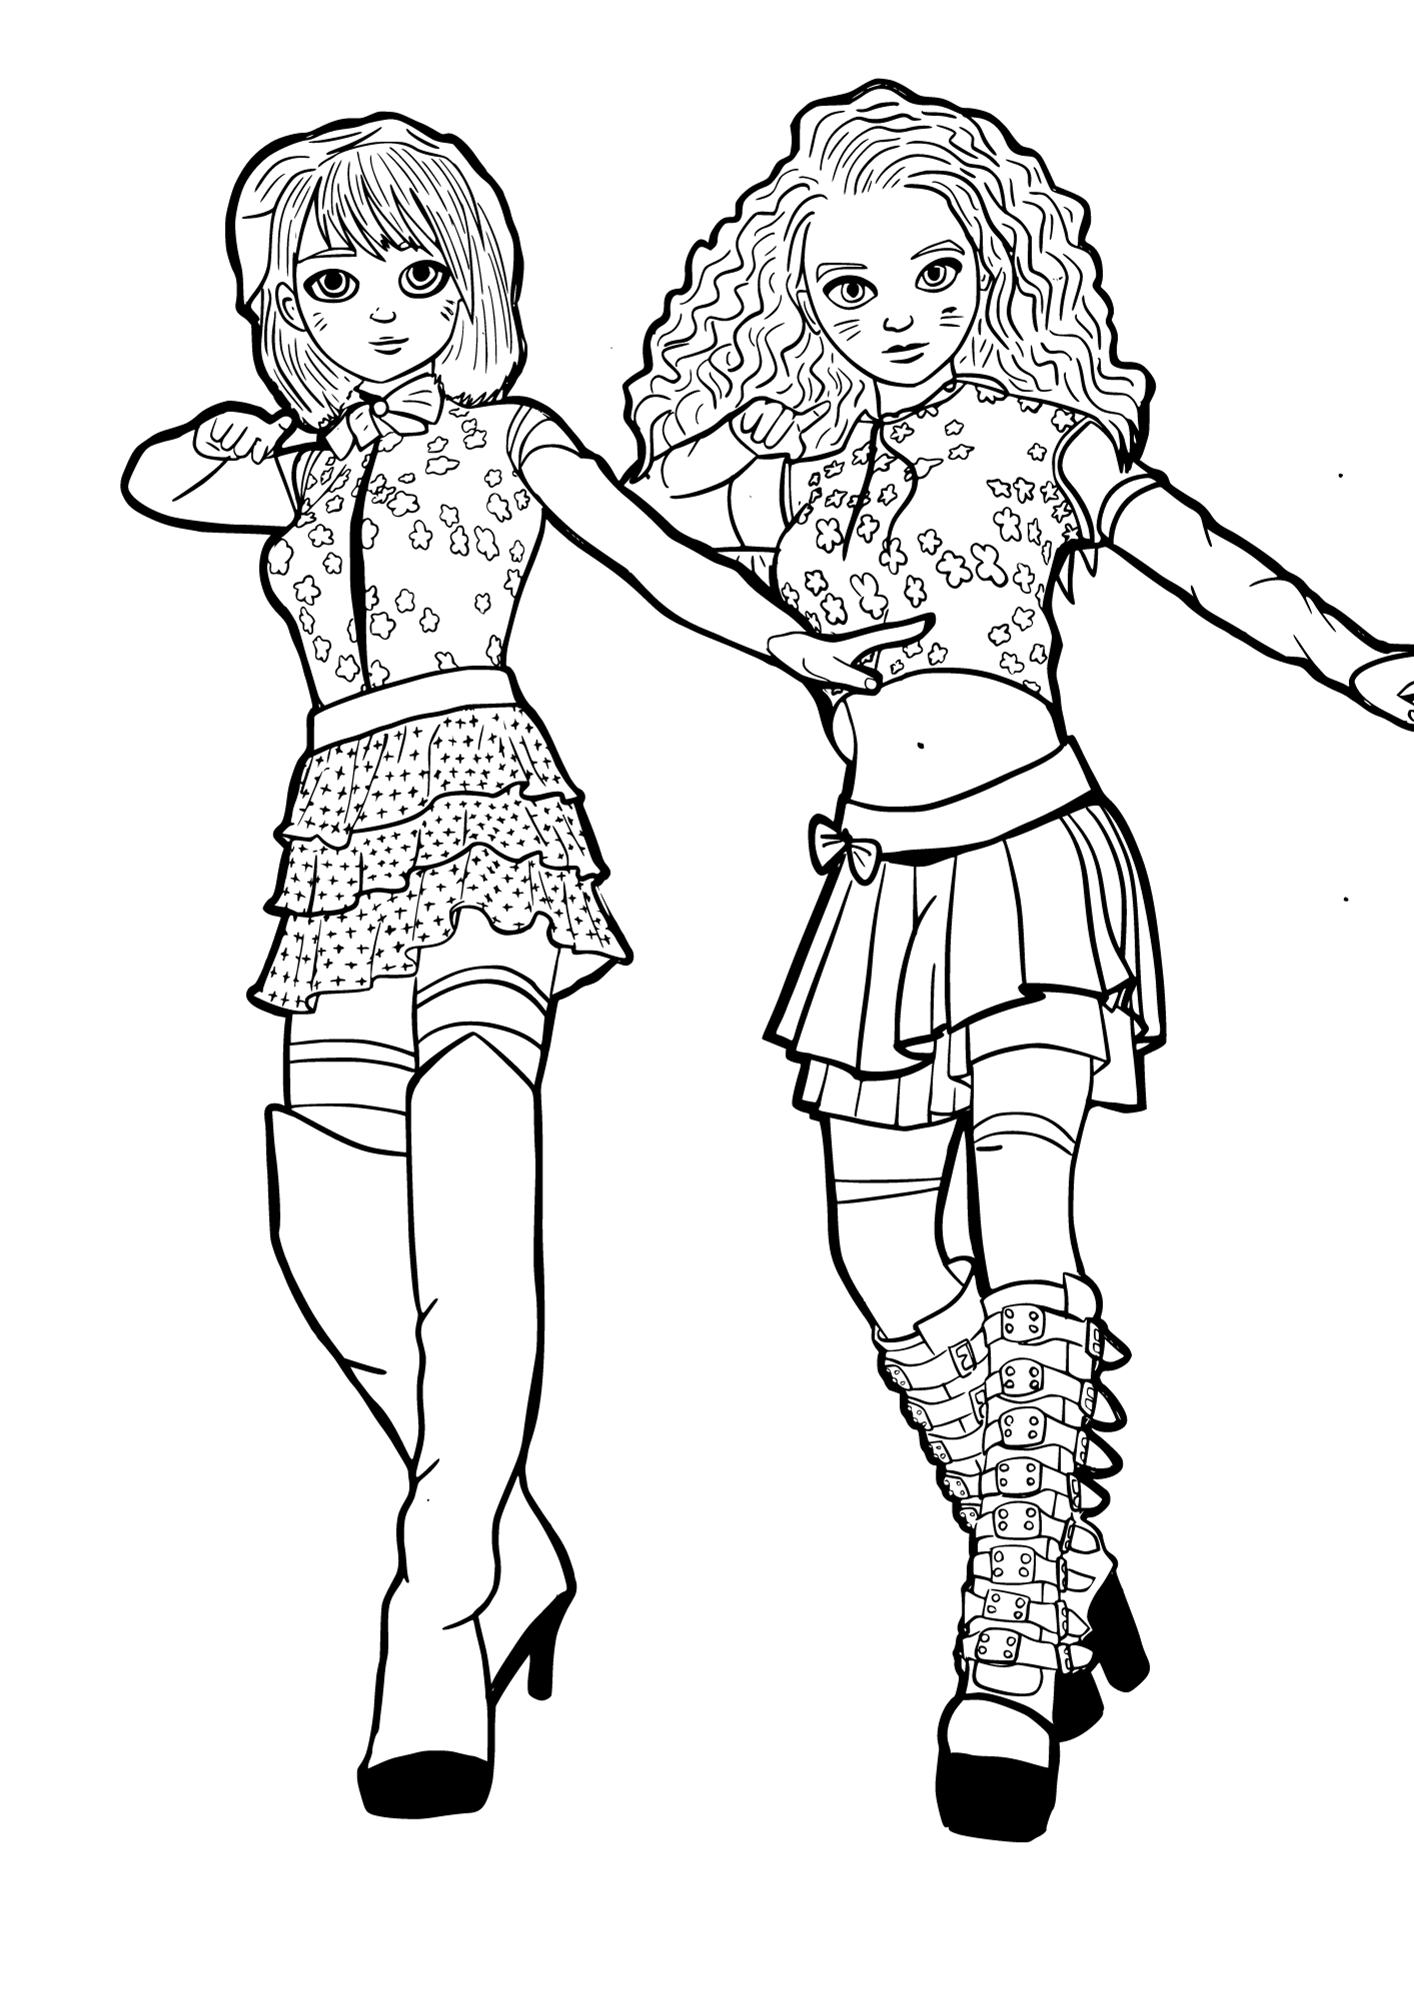 Monochrome coloring page of two fashionista friends dancing